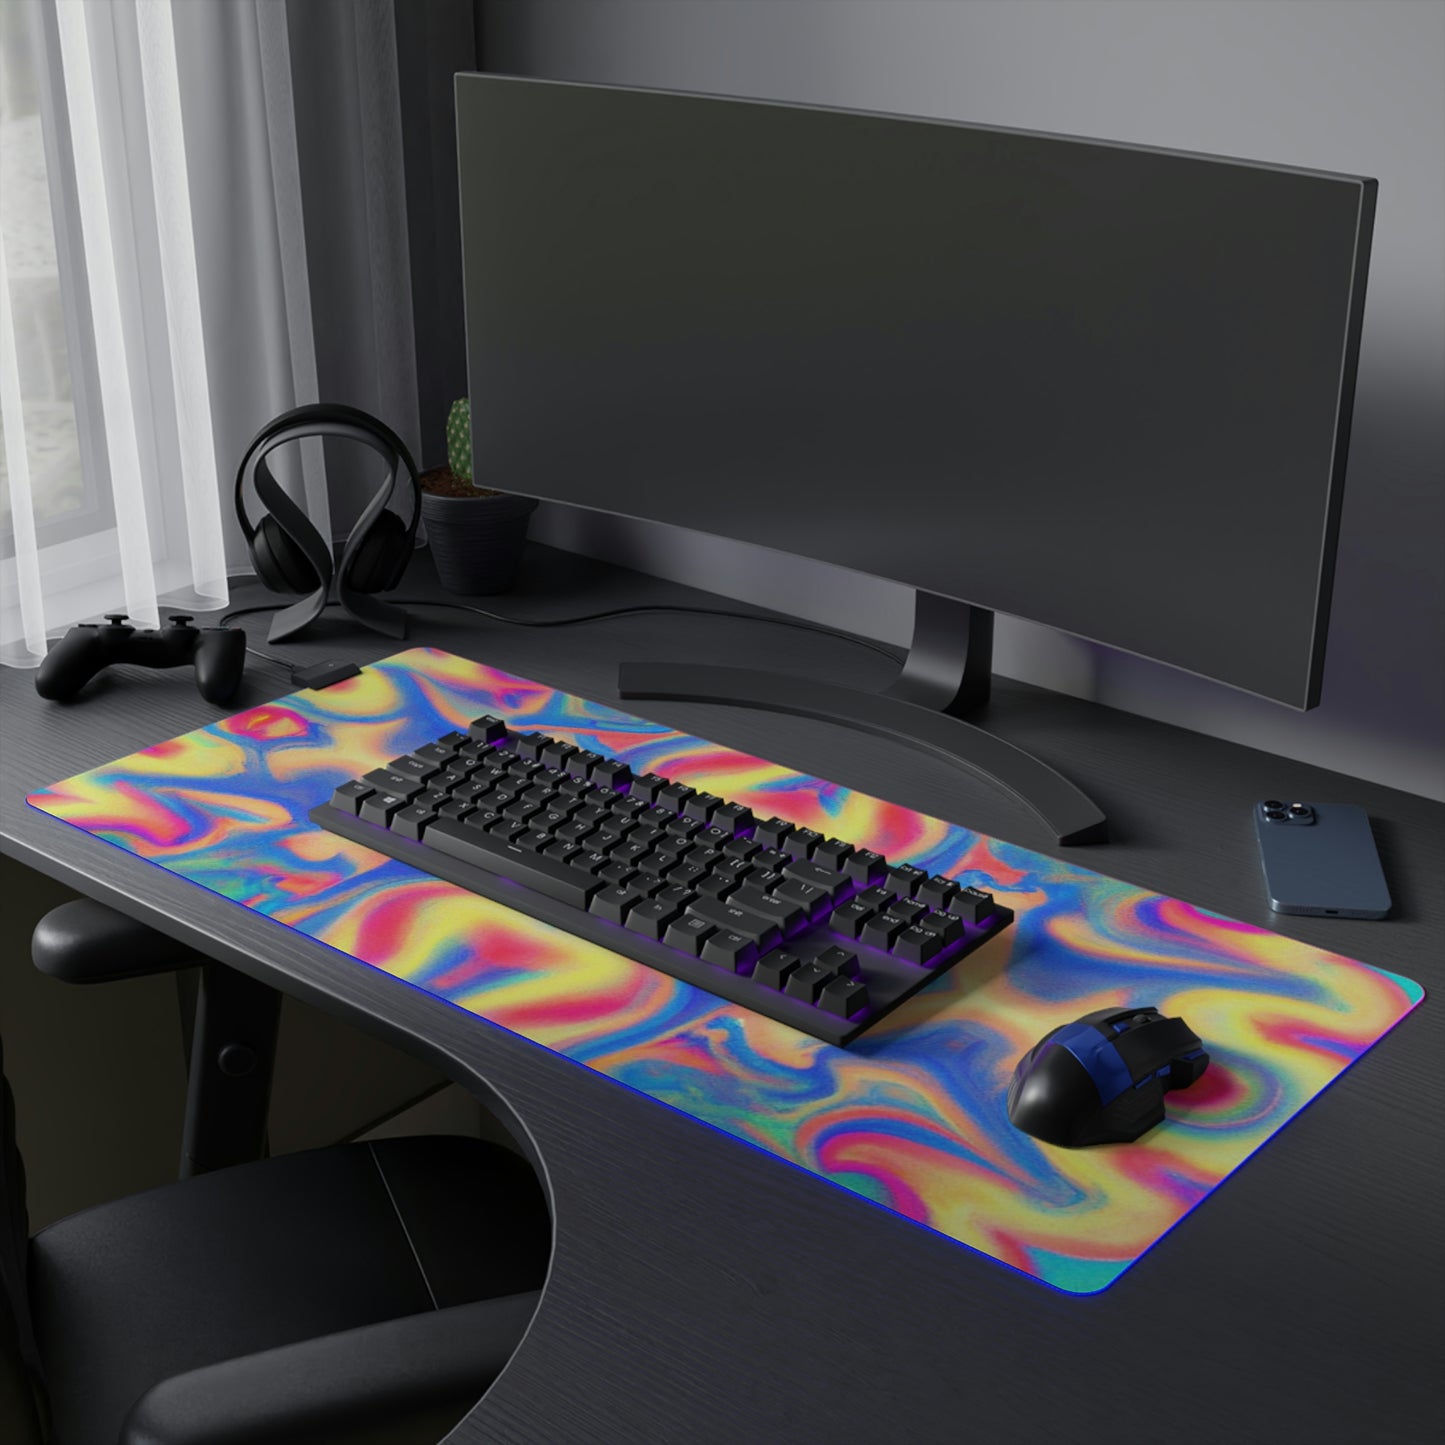 Rocky "Rocket" Rodillio - Psychedelic Trippy LED Light Up Gaming Mouse Pad